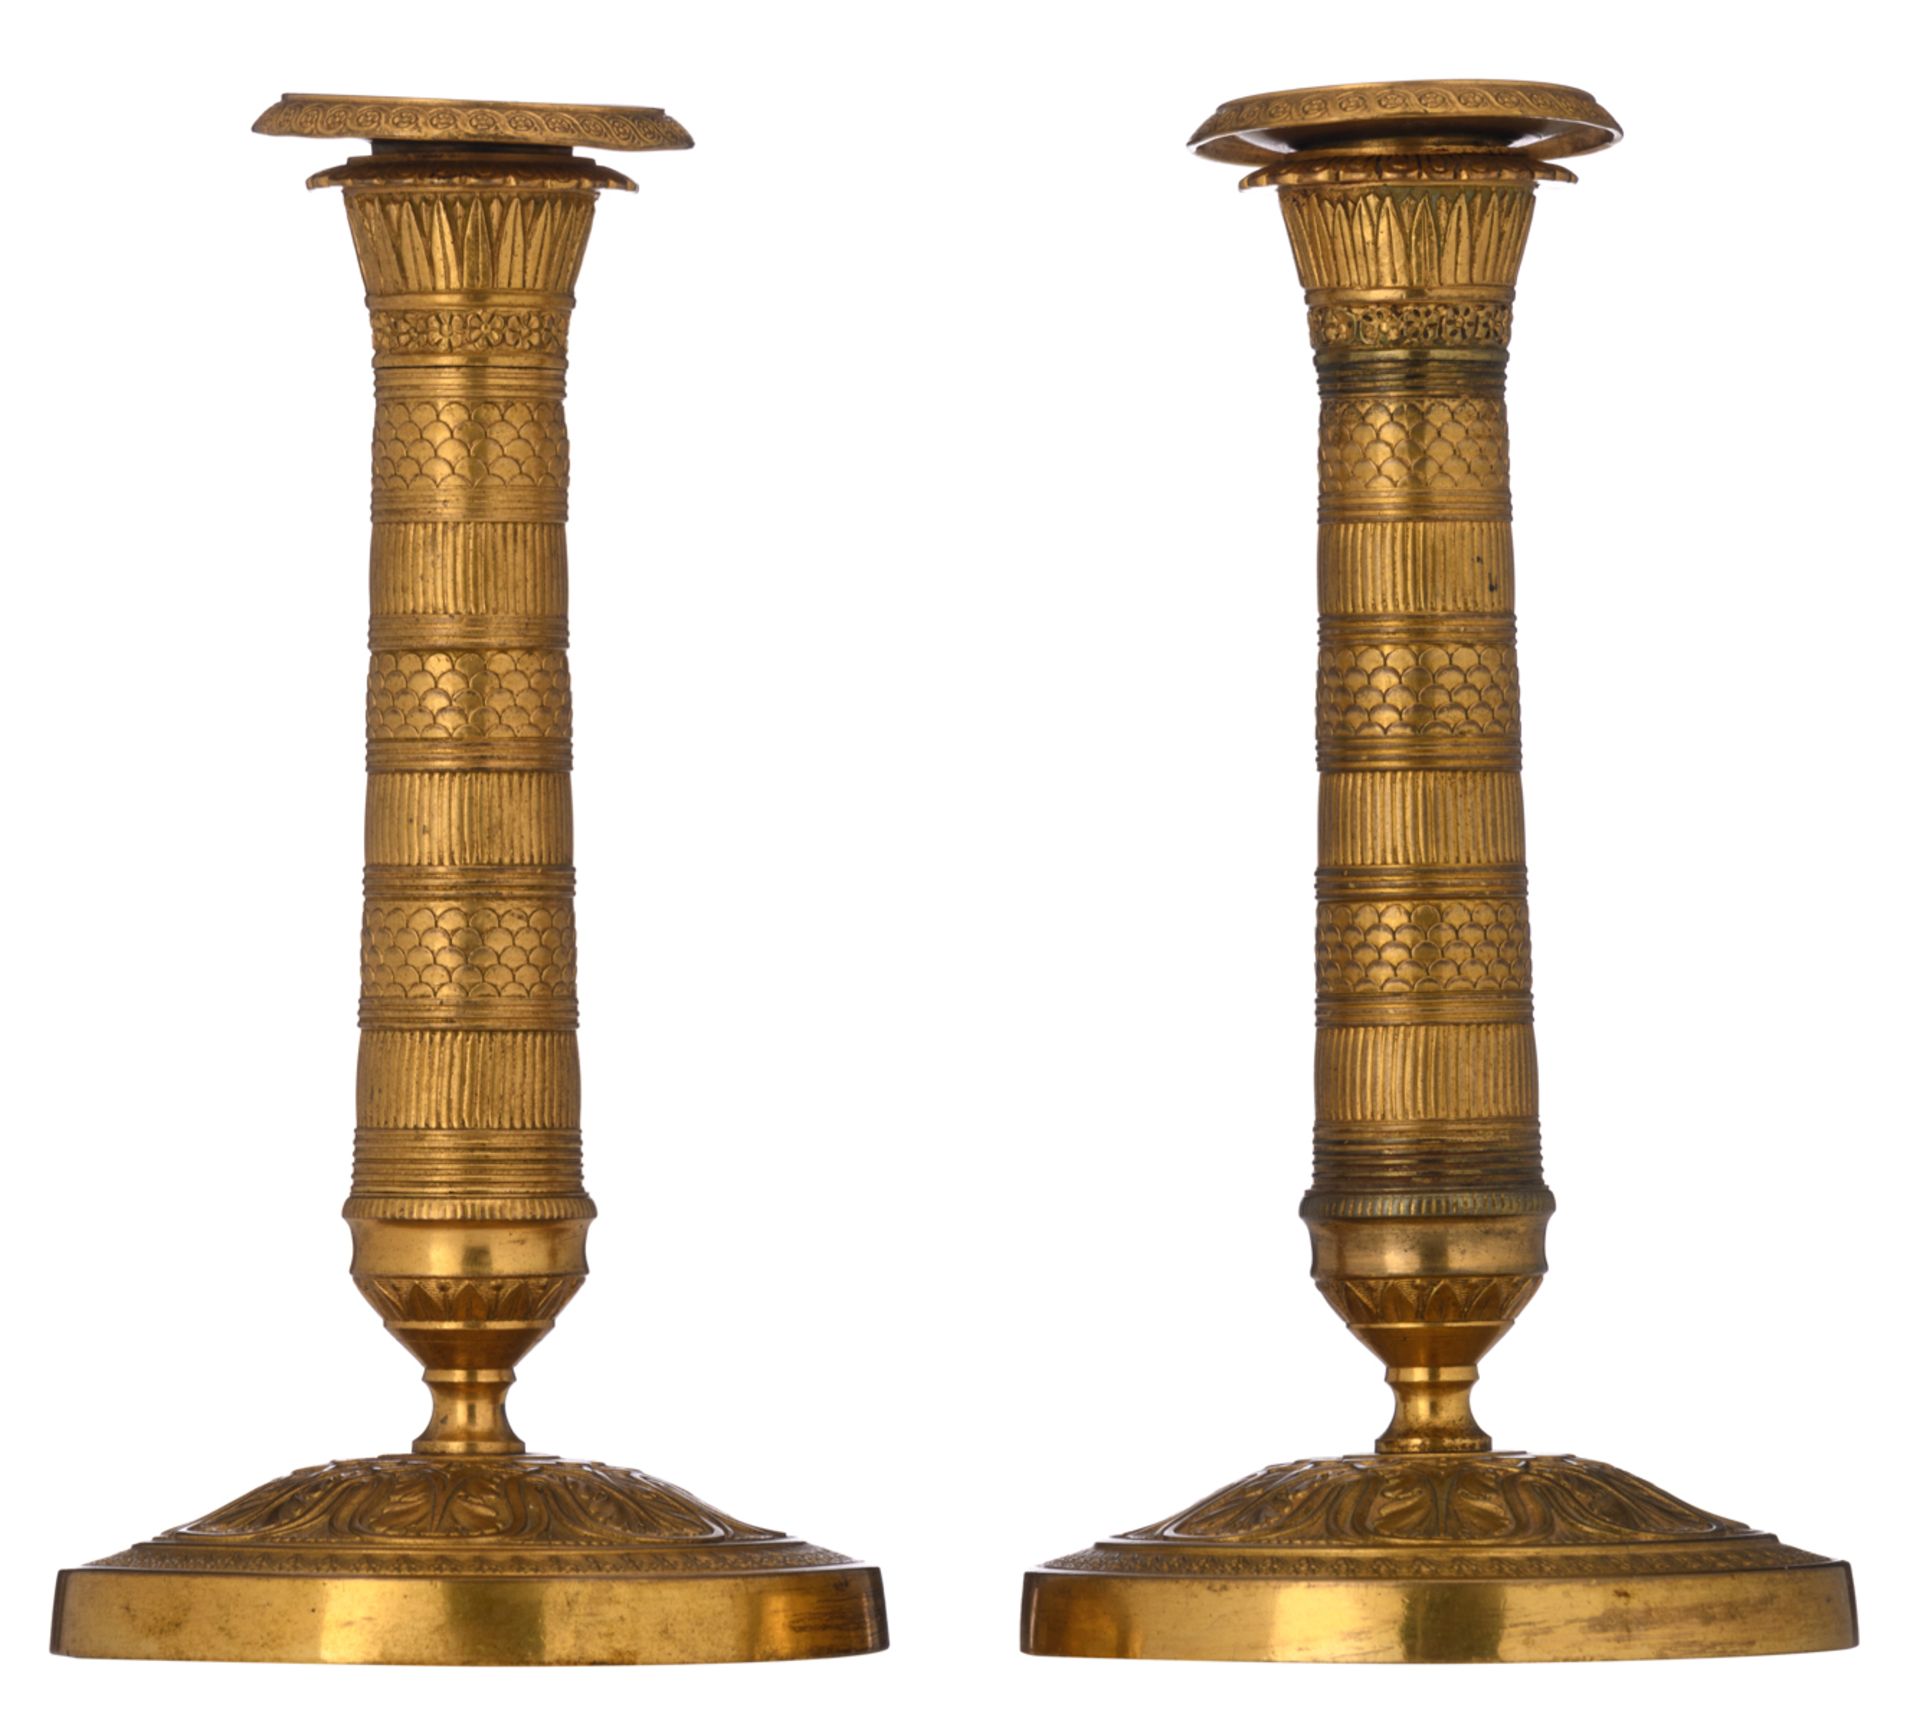 A fine pair of 'French Restauration' brass candlesticks, first quarter of the 19thC, H 18 cm